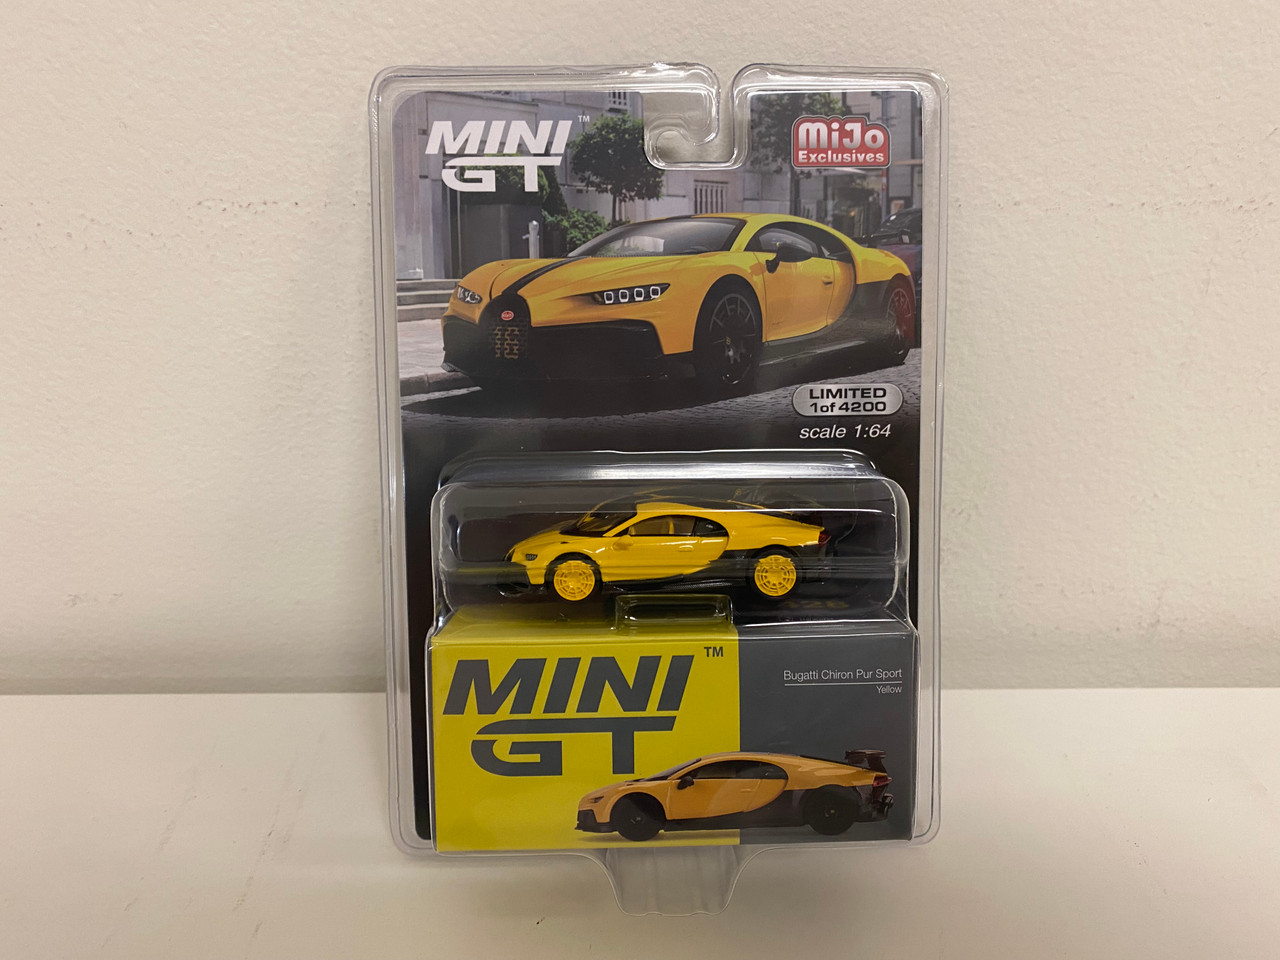 CHASE CAR 1/64 MINI GT Bugatti Chiron Pur Sport (Yellow with Yellow Wheels) Diecast Car Model